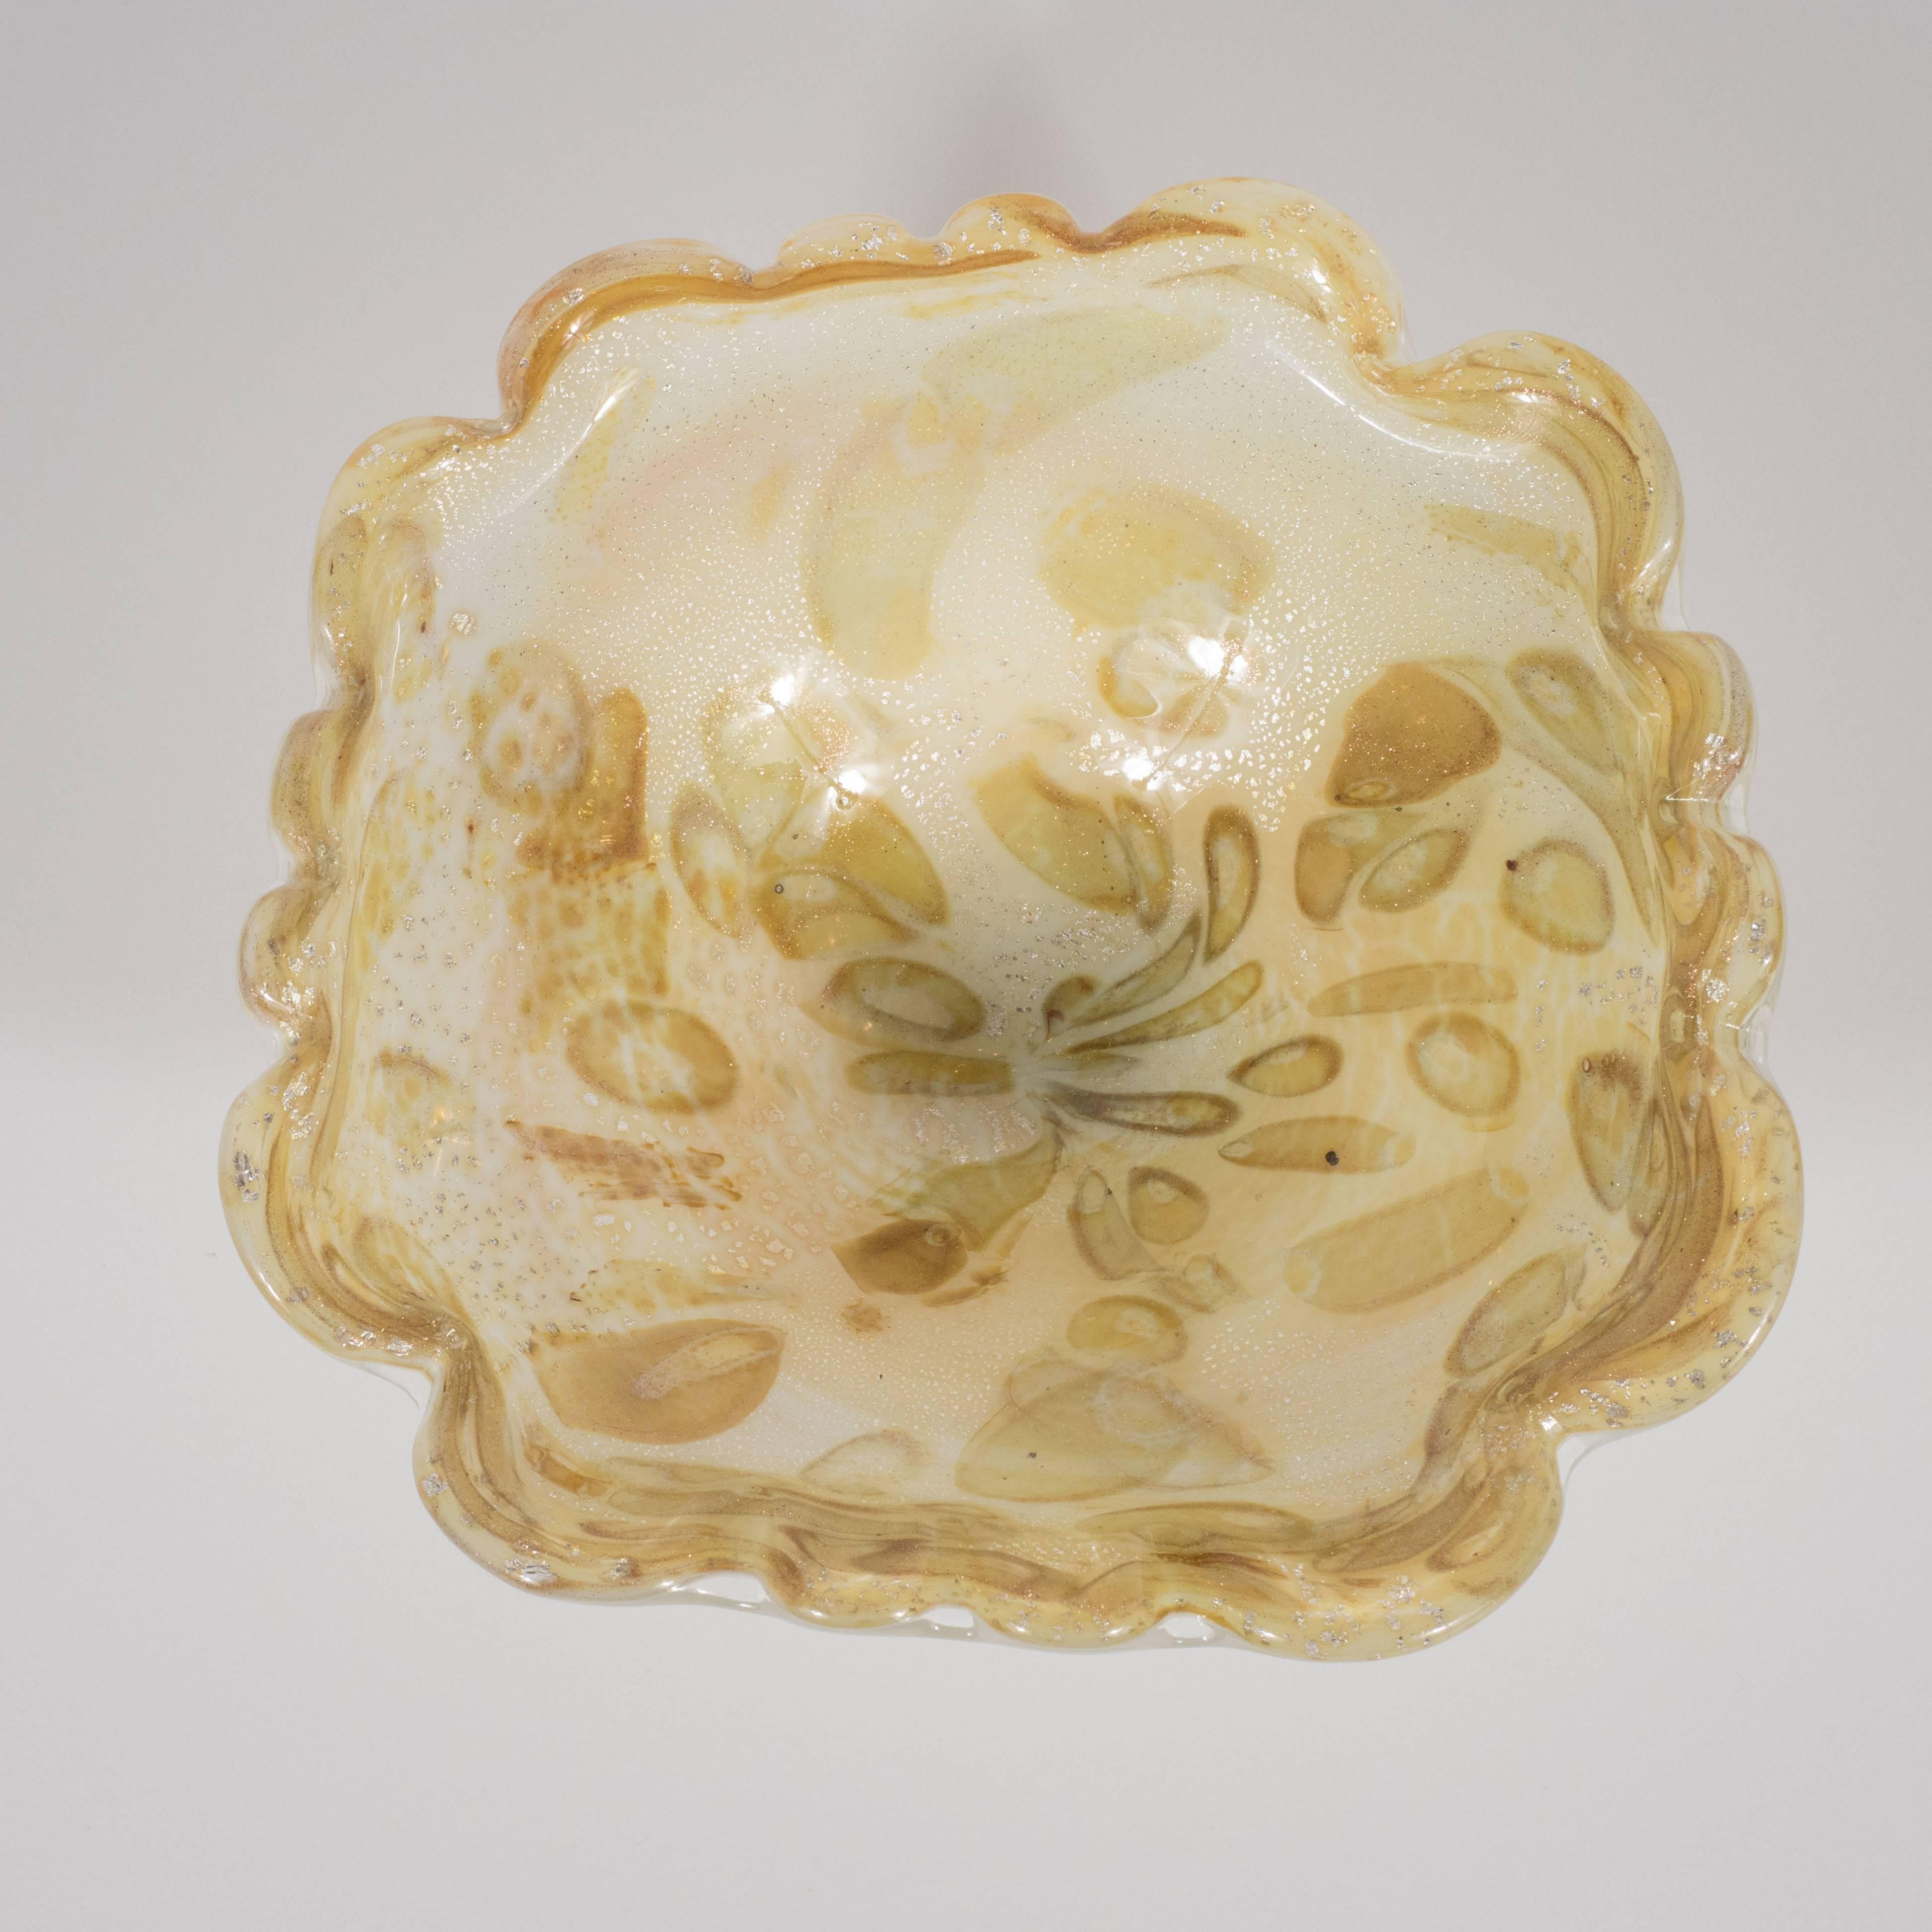 This stunning handblown Murano glass bowl features scalloped edges and a wealth of specter-like forms in shades of champagne, oyster shell and pistachio emanating from the center as well as an abundance of white gold flecks throughout. With its